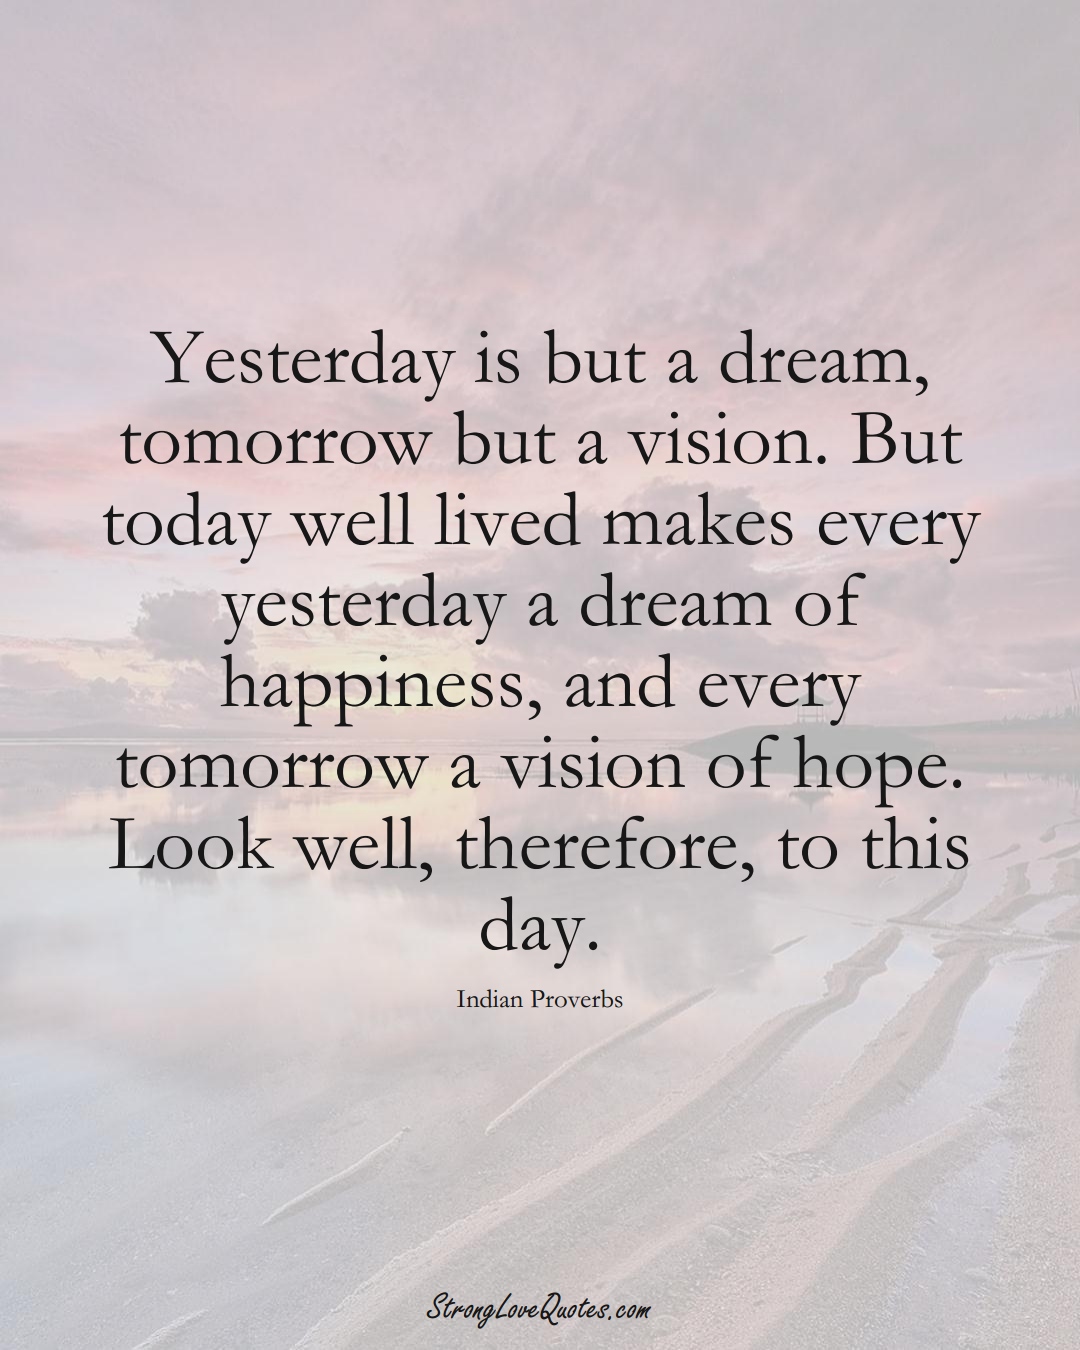 Yesterday is but a dream, tomorrow but a vision. But today well lived makes every yesterday a dream of happiness, and every tomorrow a vision of hope. Look well, therefore, to this day. (Indian Sayings);  #AsianSayings